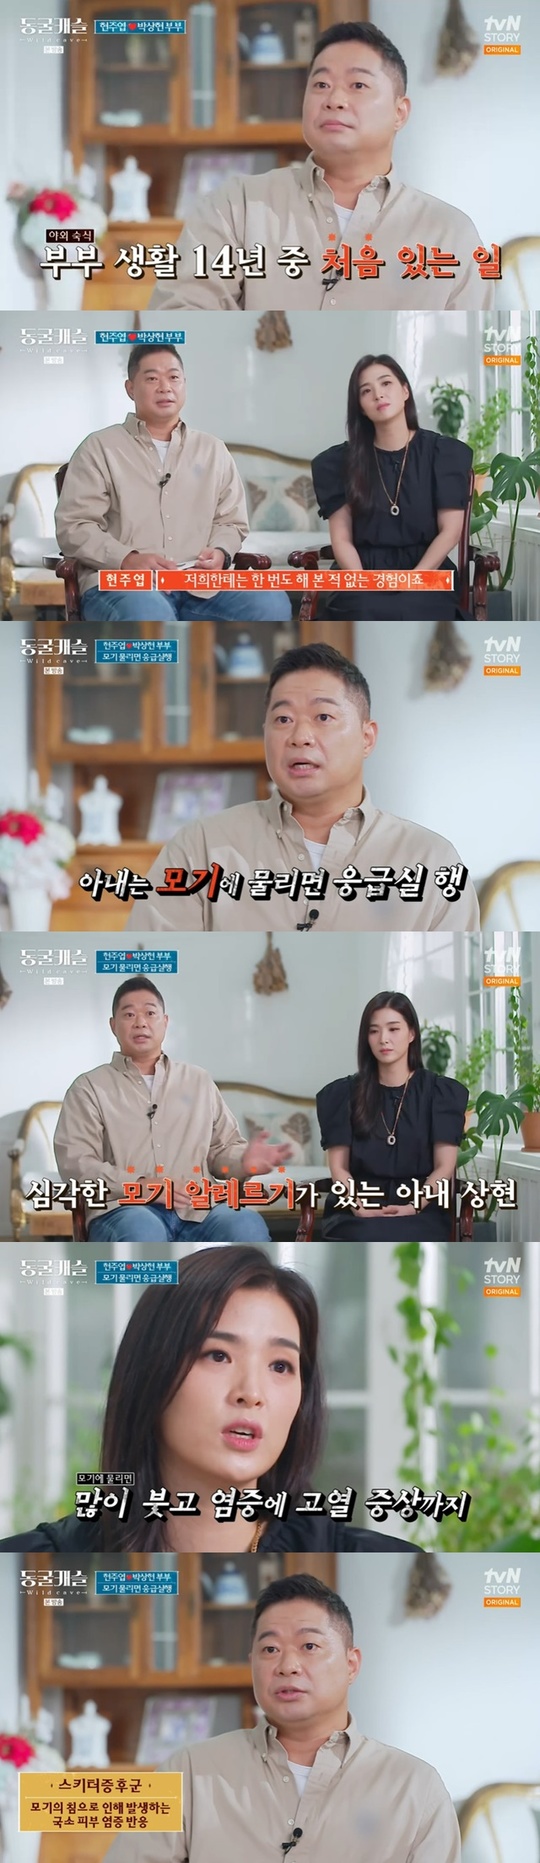 Hyun Joo-yup worried about his wife, Park Sang-hyun, allergy to mosquitoes.On TVN STORY Cave of Altamira Castle broadcast on November 2, the Hyun Joo-yup Park Sang-hyun couple appeared.When asked if he had a crush on his wife, Park Sang-hyun, on June 21, 2007, when the couple married in their 14th year, No, said the couple.At first sight, Im attracted to you. I want to find out more. Ill see you.Park said of her first meeting with her husband, Hyun Joo-yup, You can open the car door, take it if you take off your coat.Im telling you to get off quickly, he said.Im sleeping outside for the first time, said Hyun Joo-yup. Top Model. Ive never done it before.Others are easy to camping and outdoor activities, but we have never done it.I couldnt do it because I had to go to the emergency room if my wife was bitten by mosquitoes. I was worried about my wife, Park Sang-hyun, about mosquito allergies.